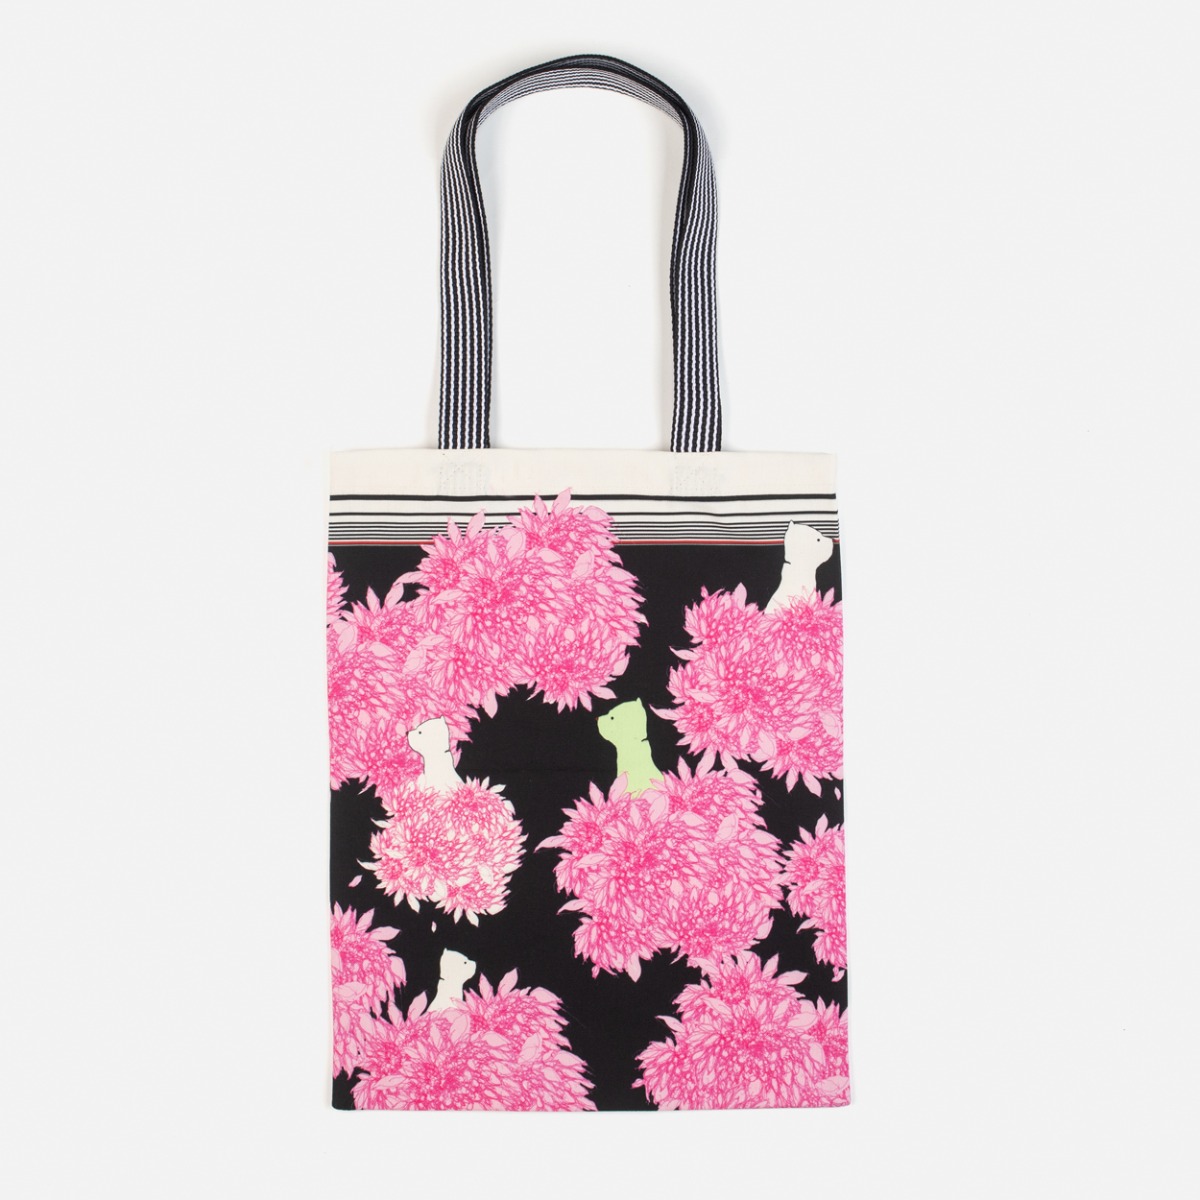 Flowers and Puppy Tote Bag